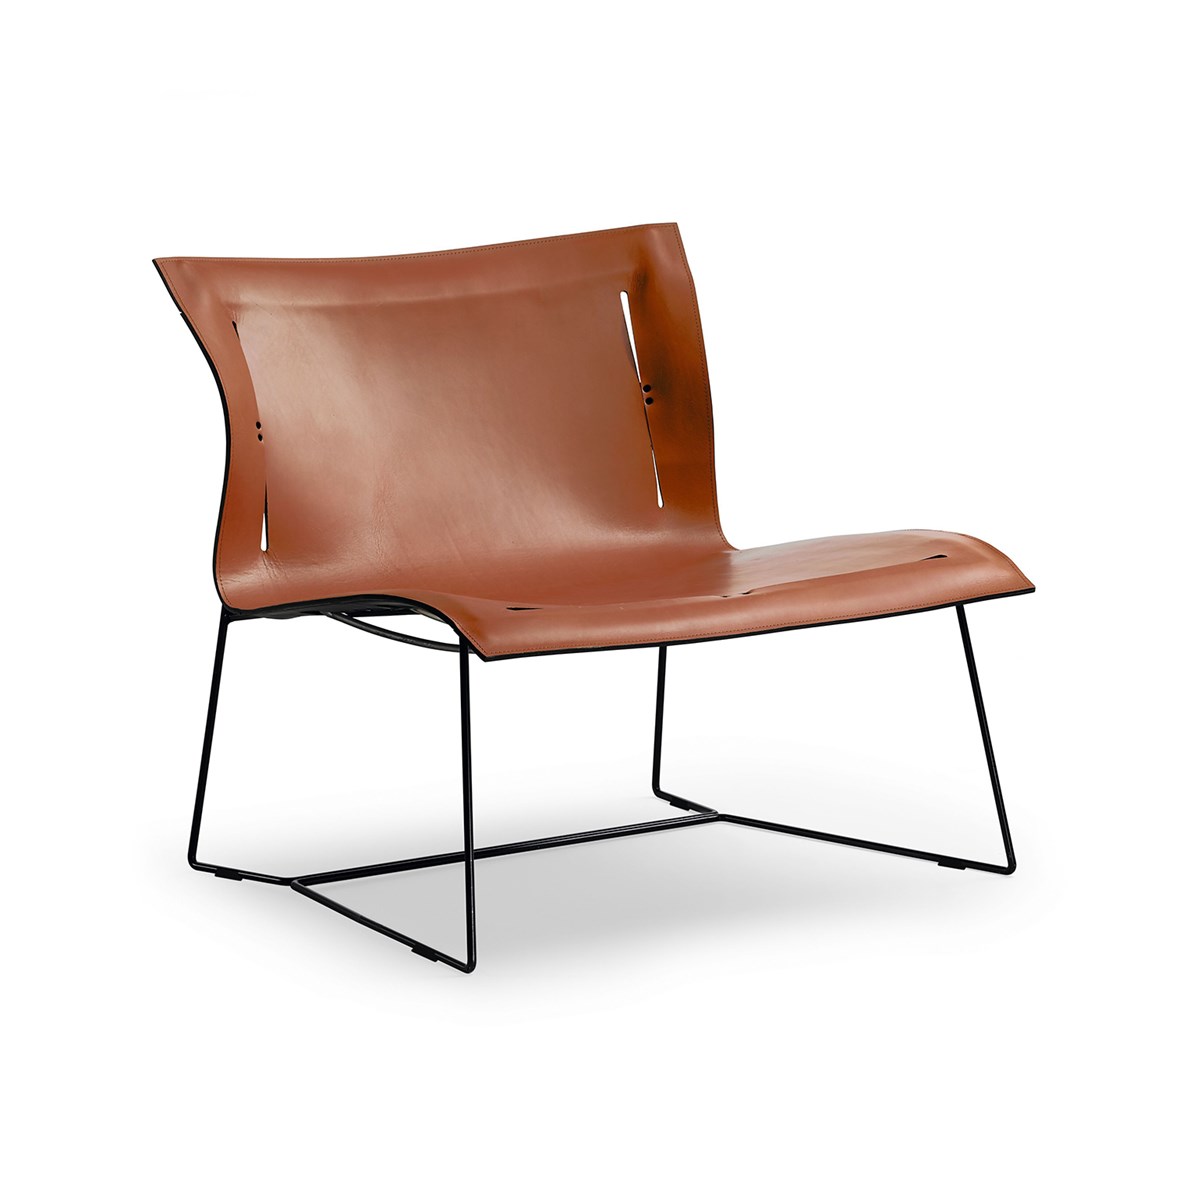 Walter-Knoll-EOOS-Cuoio-Lounge-Chair-Matisse-1